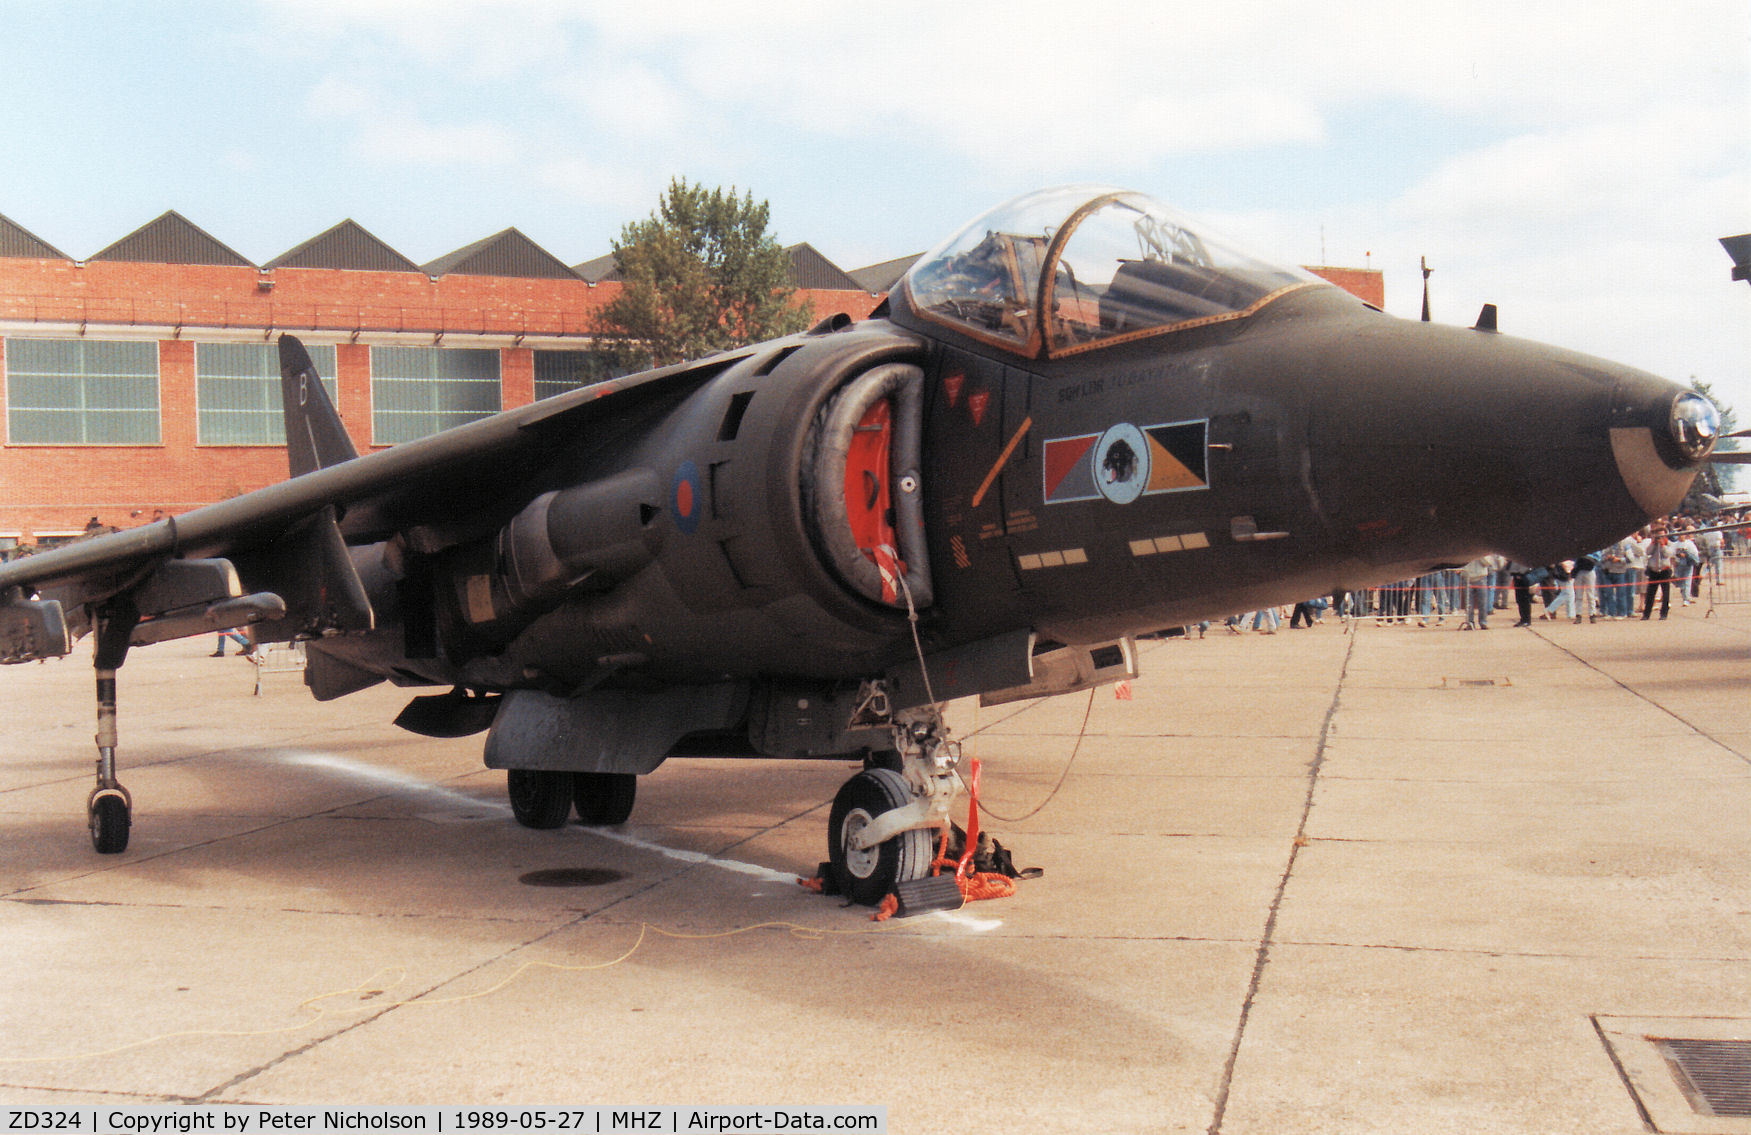 ZD324, 1987 British Aerospace Harrier GR.5 C/N 512112/P5, Harrier GR.5 of 233 Operational Conversion Unit on display at the 1989 RAF Mildenhall Air Fete.